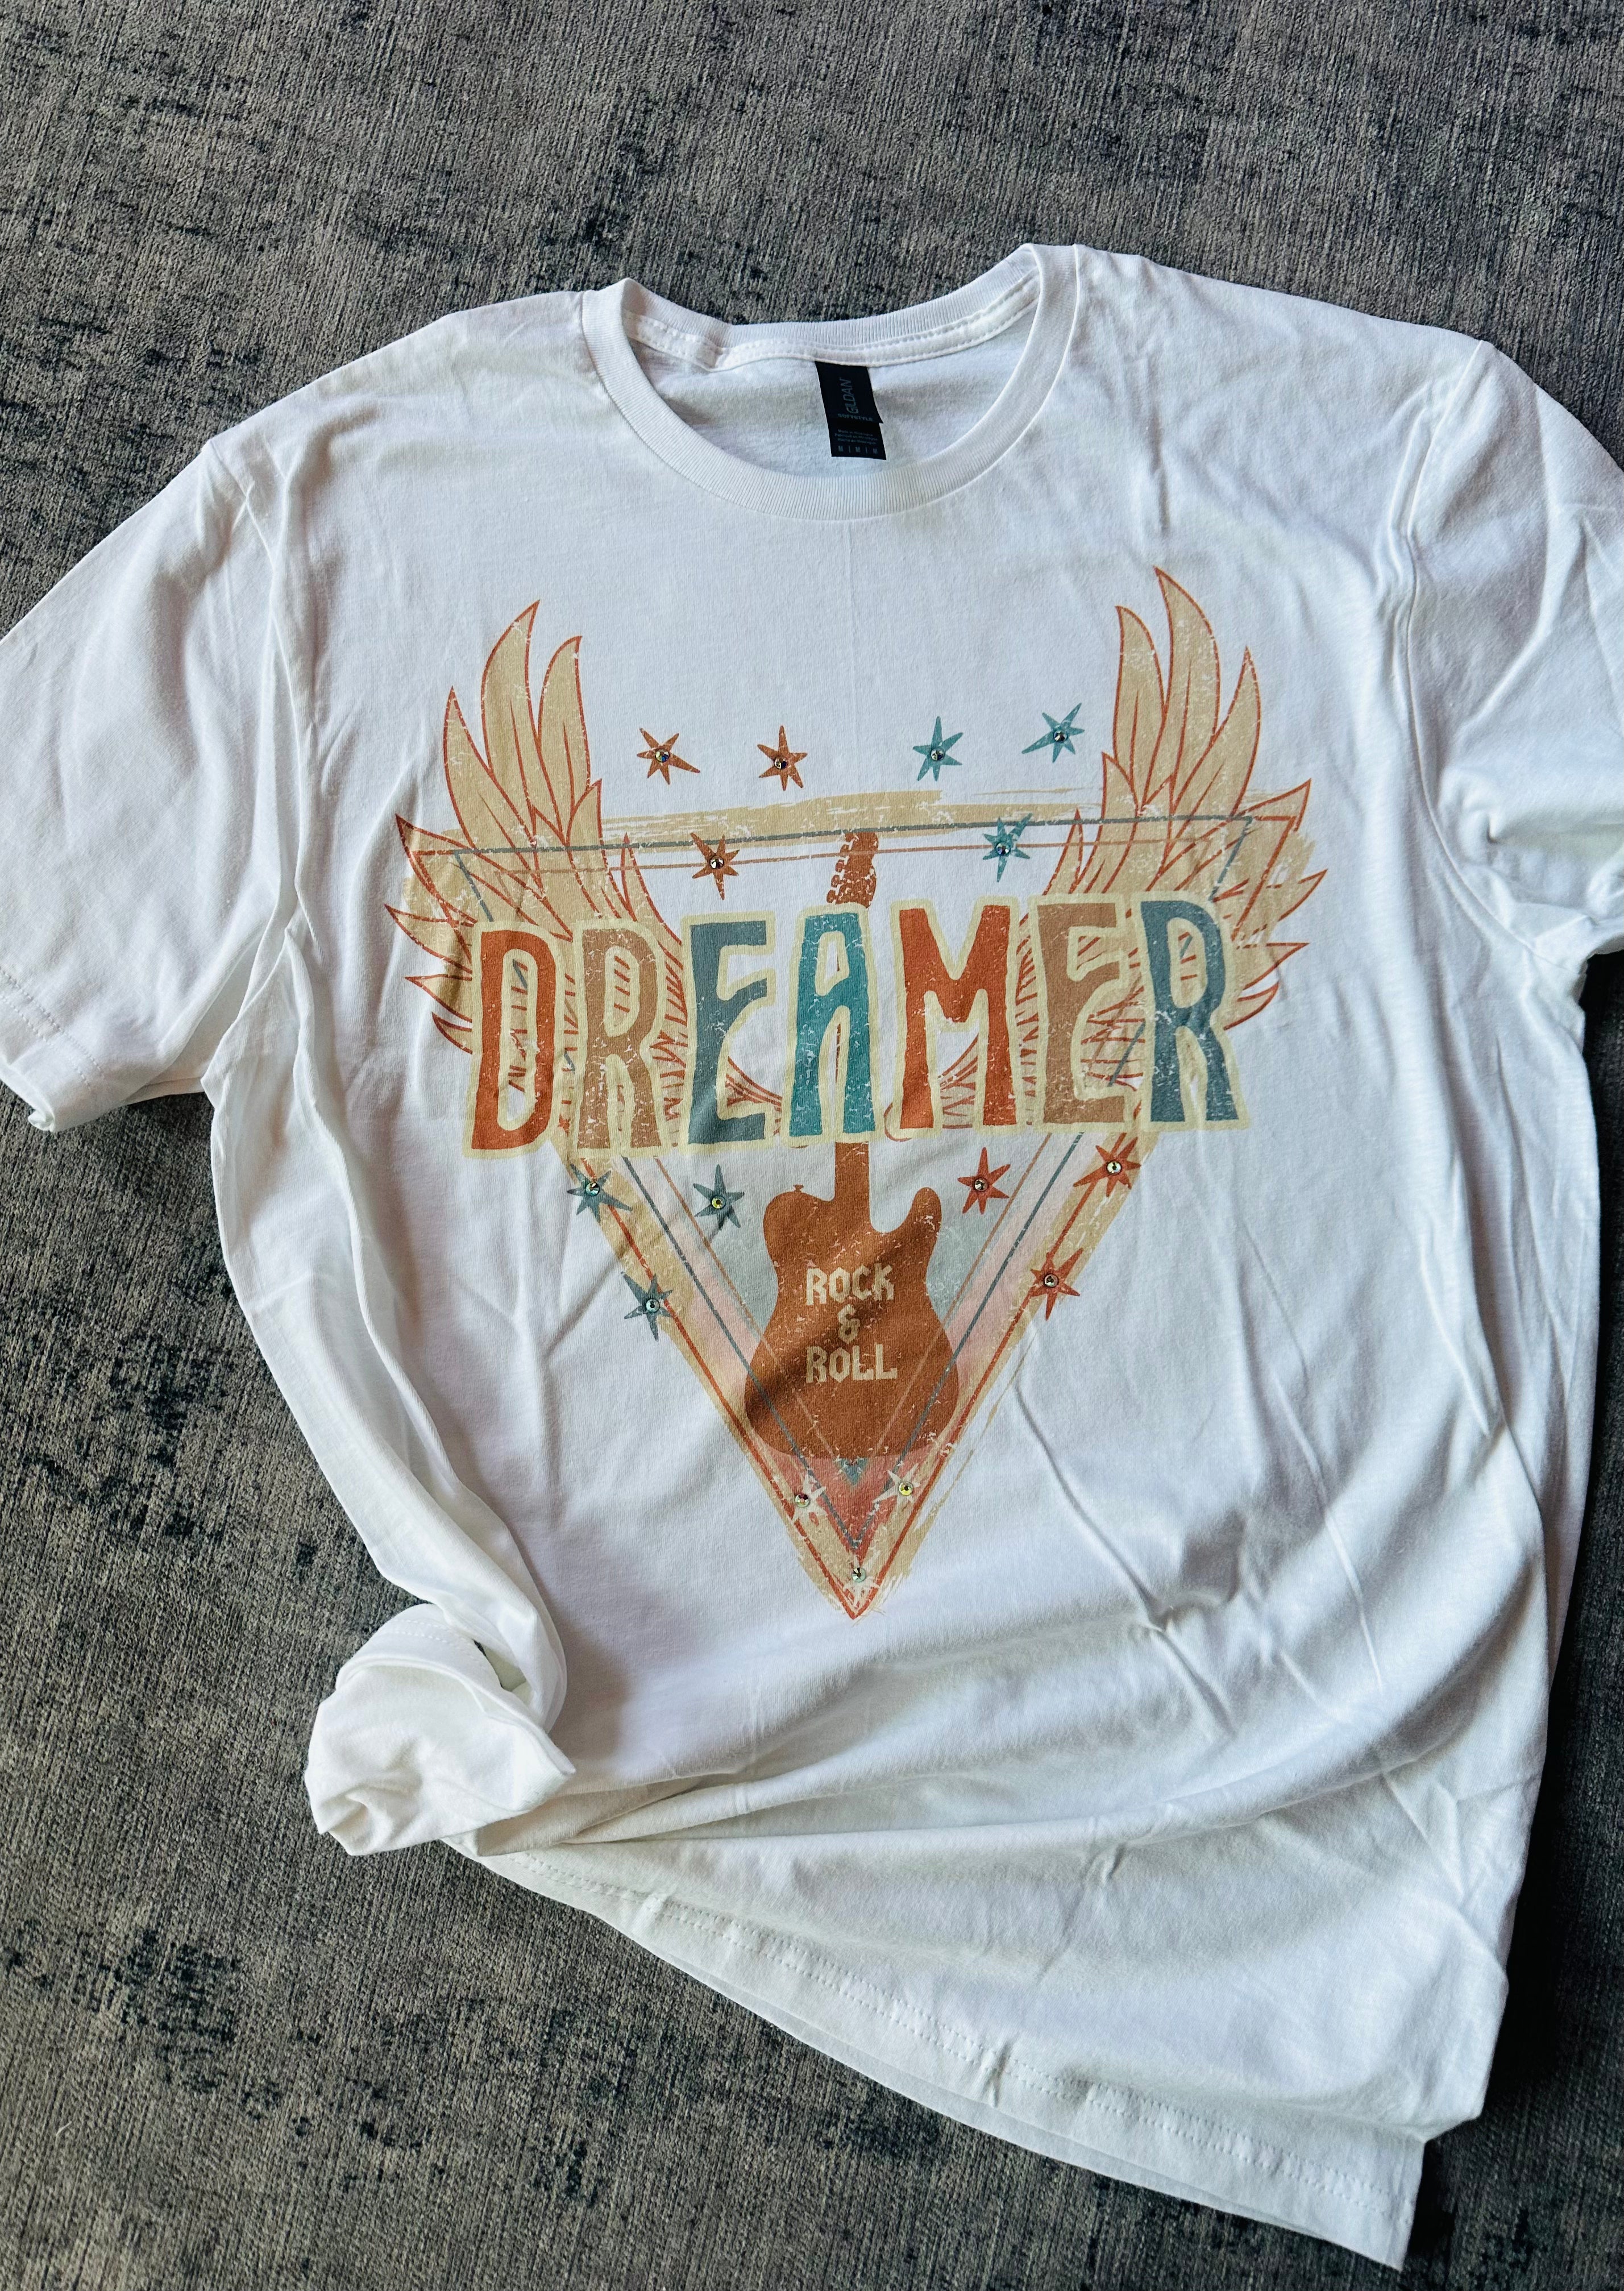 Dreamer Rock and Roll Tee- With Crystals